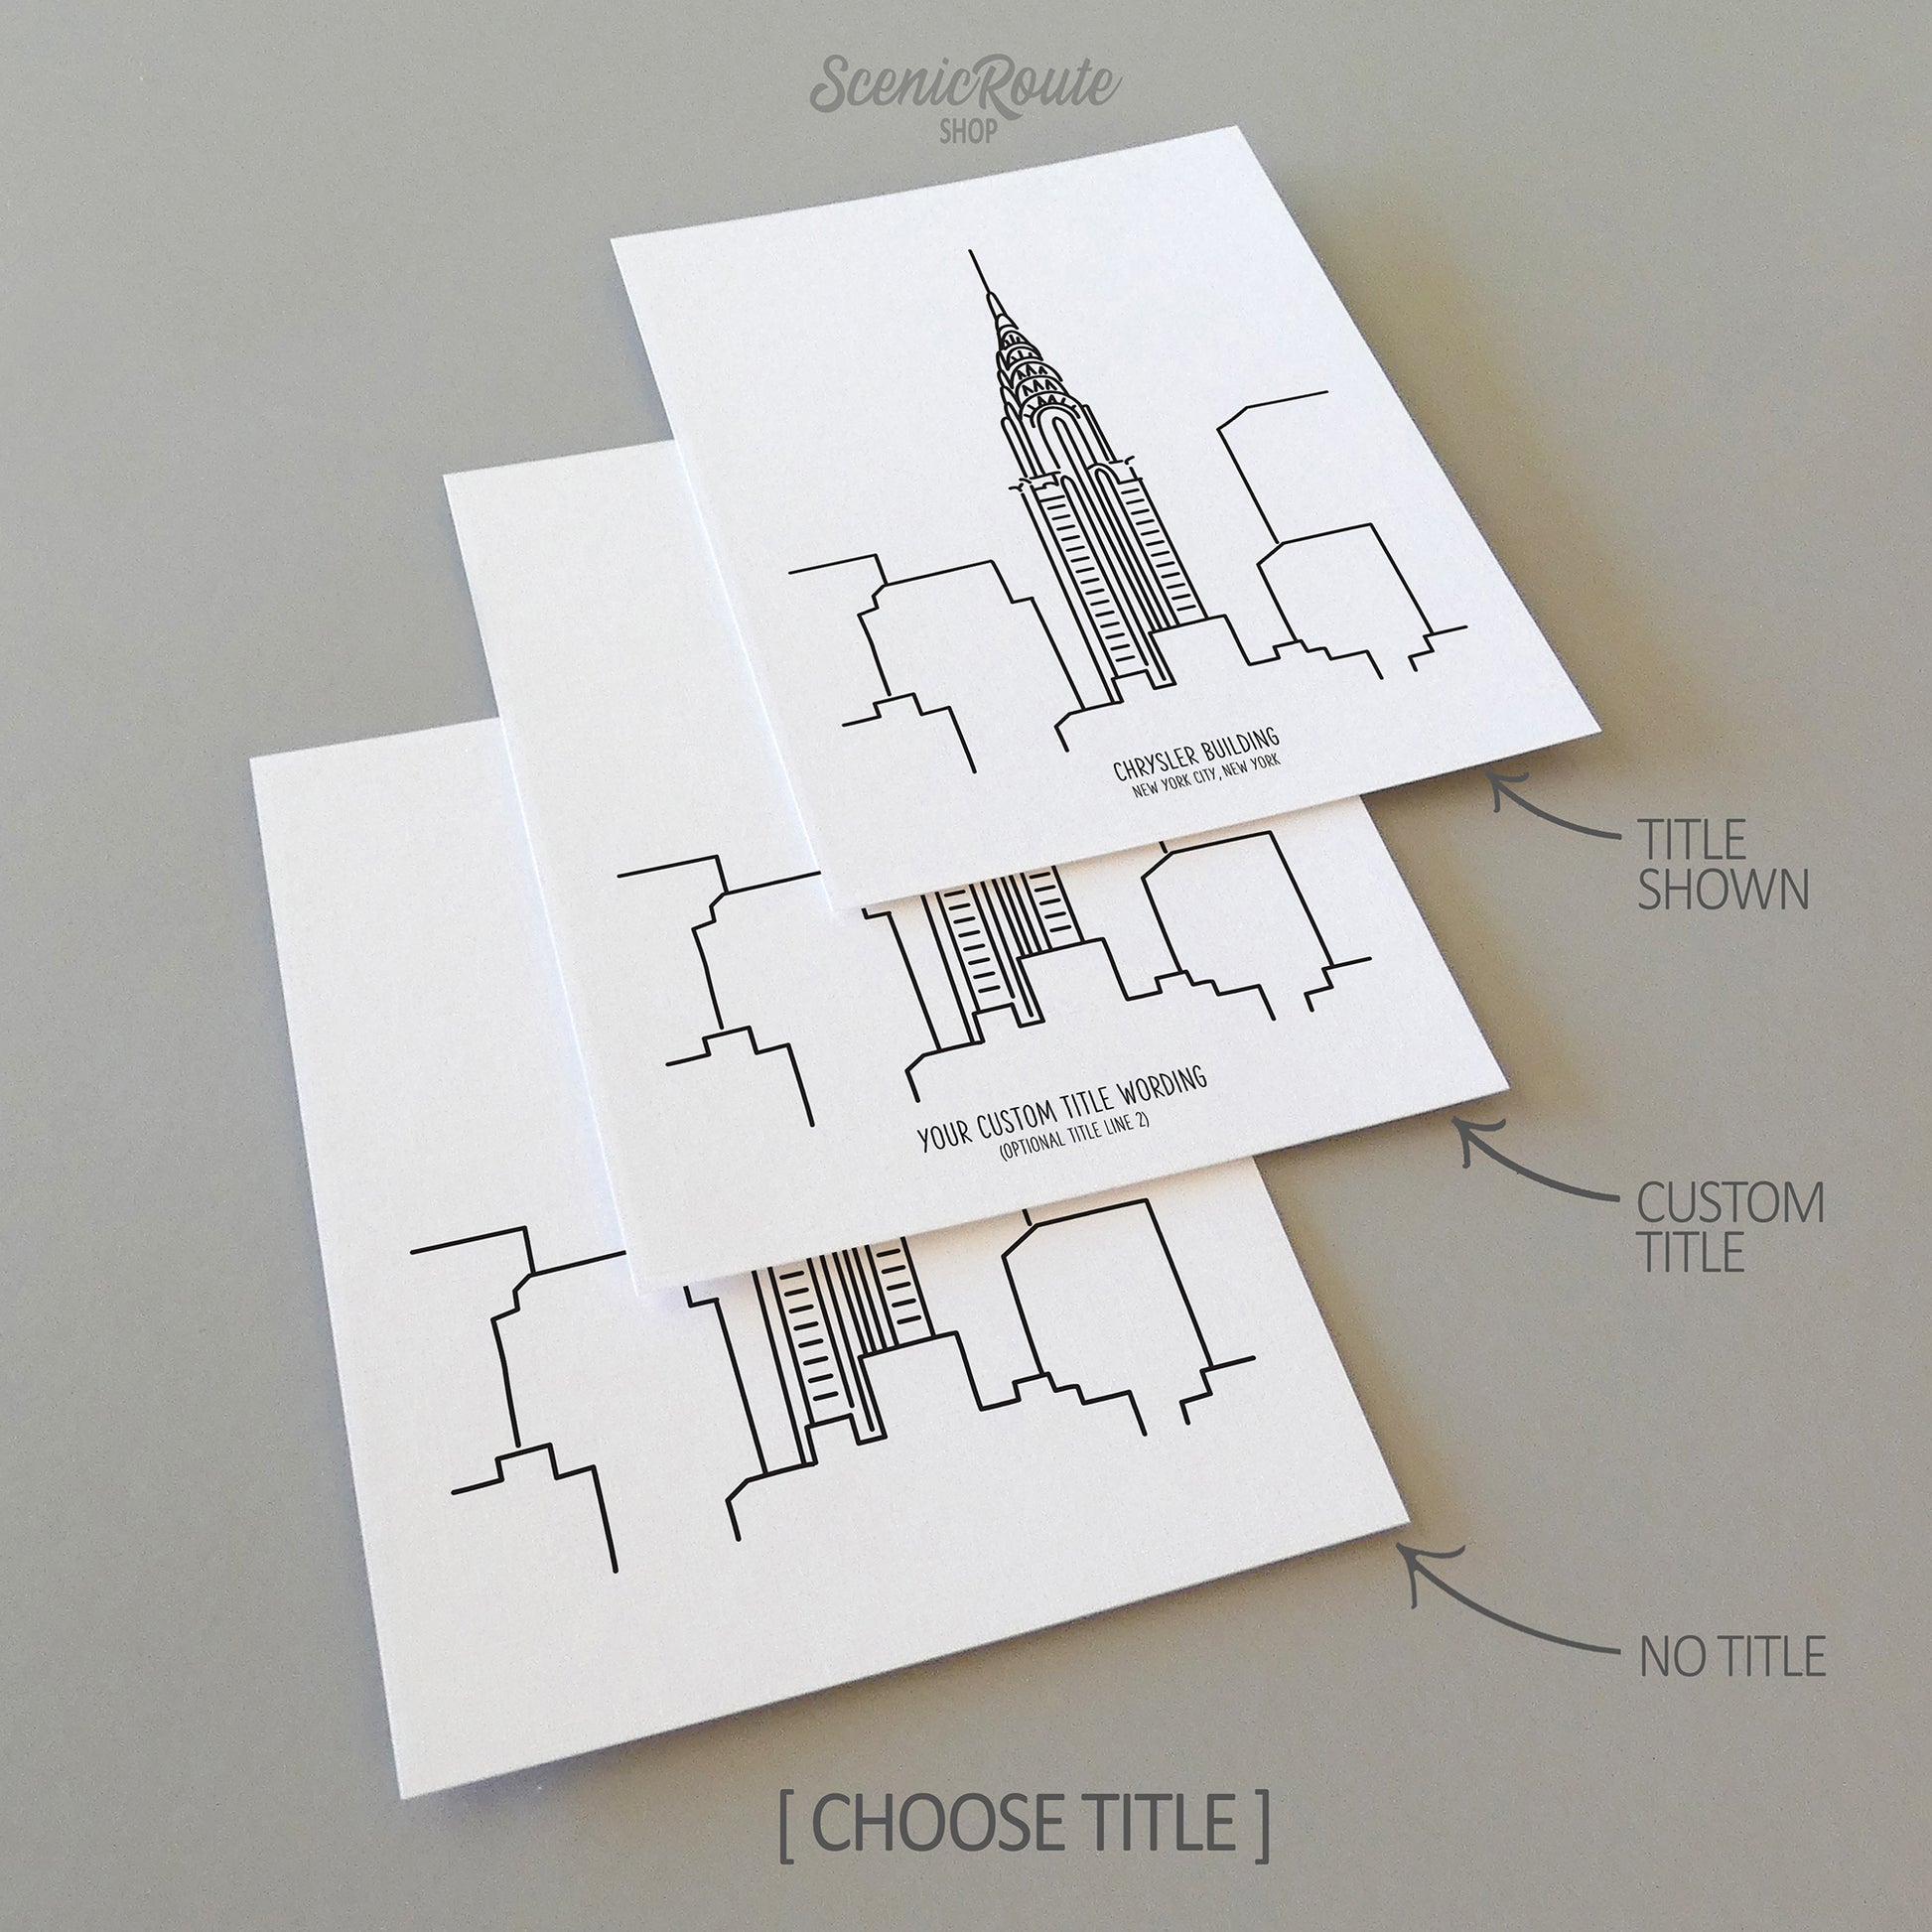 Three line art drawings of the New York City Chrysler Building on white linen paper with a gray background.  The pieces are shown with title options that can be chosen and personalized.